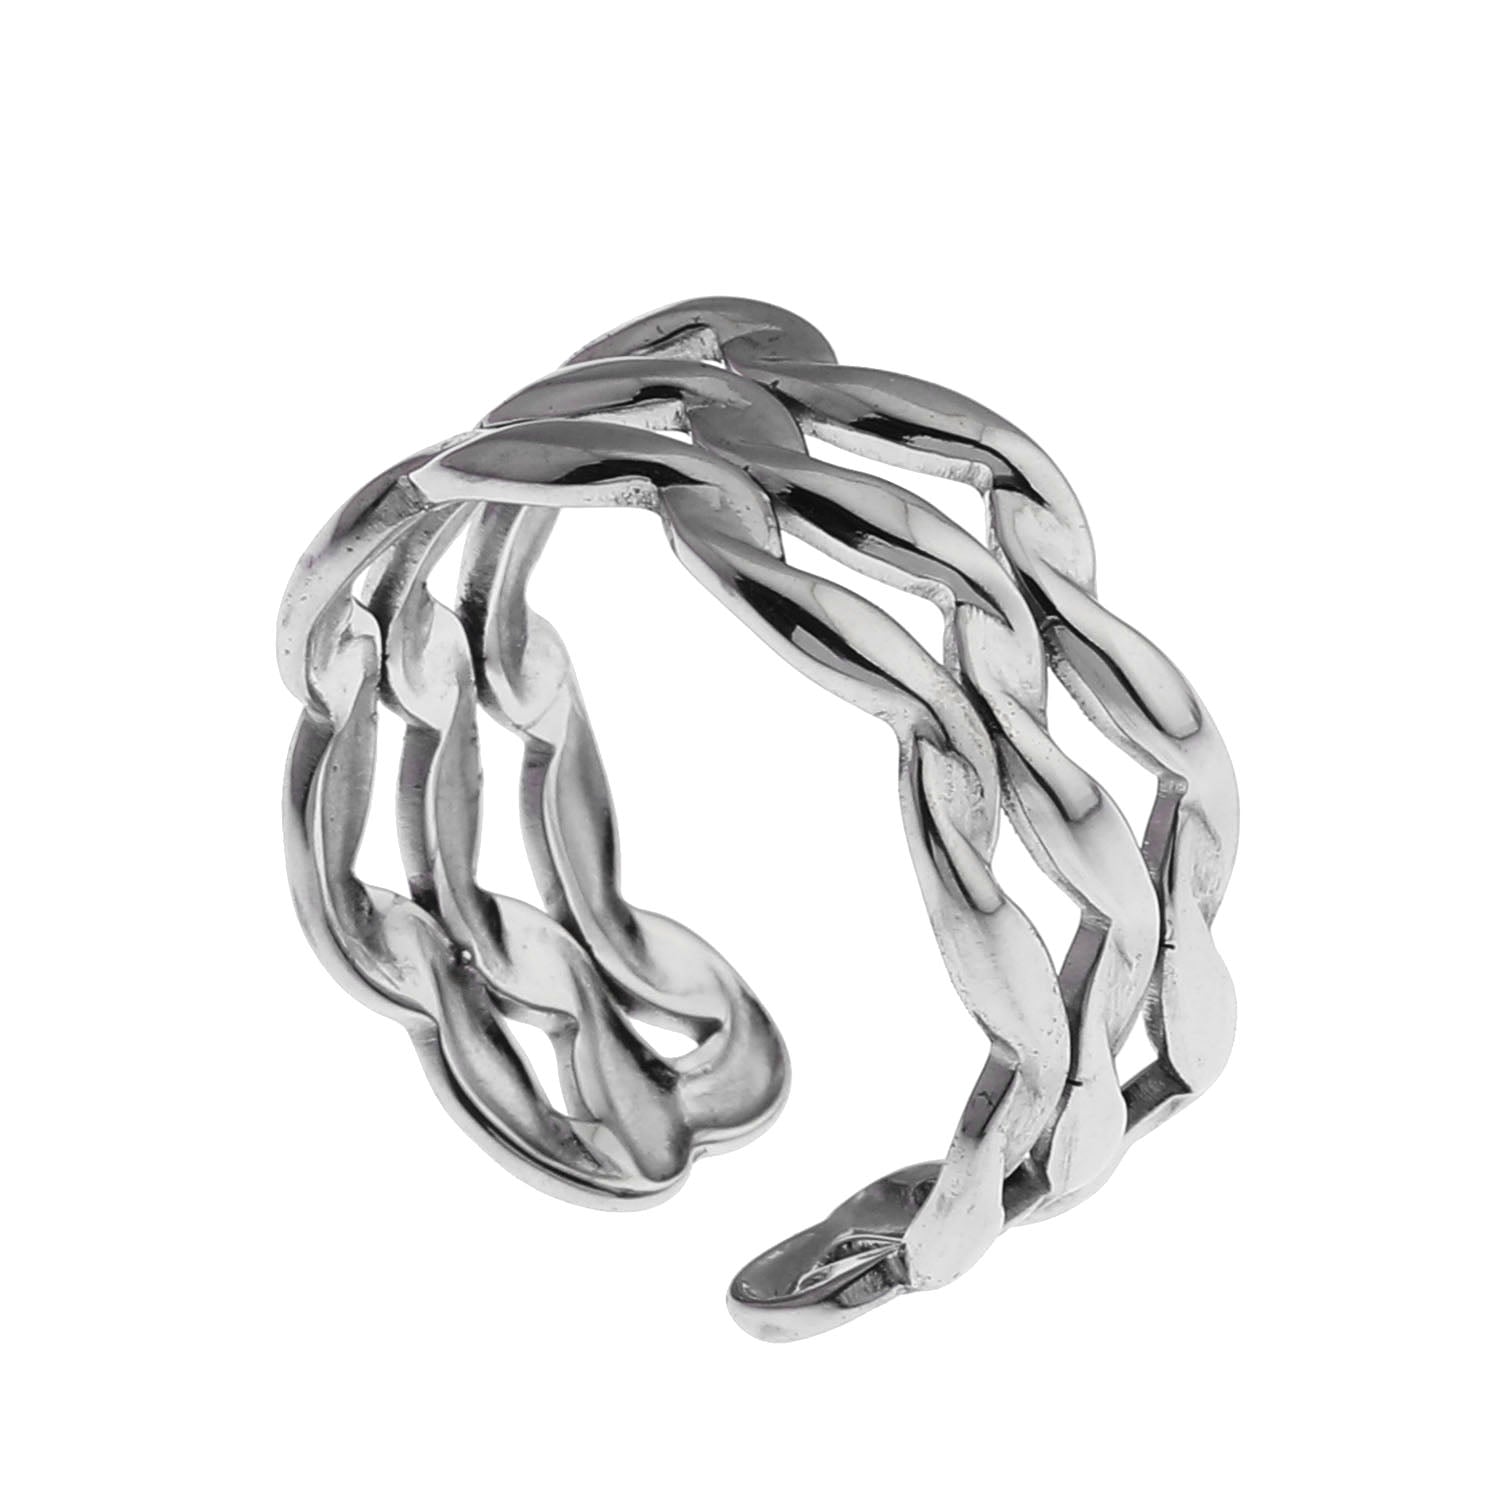 silver-ring | stacked-ring | layered-silver-ring | hackney-nine | hackneynine | necklace | hoops | bracelets | earrings | charms | studs_earrings | jewellery | jewellery-store | shop-jewelry | gold-jewellery | silver-jewellery | dressy_jewellery | classy_ jewellery | on_trend_jewellery | fashion_ jewellery | cool_jewellery | affordable_jewellery | designer_jewellery | vintage_jeweler | gifts-for-her | gifts-for-mum | gifts-for-girls | gifts-for-females | dainty-jewellery | bridesmaid-gift